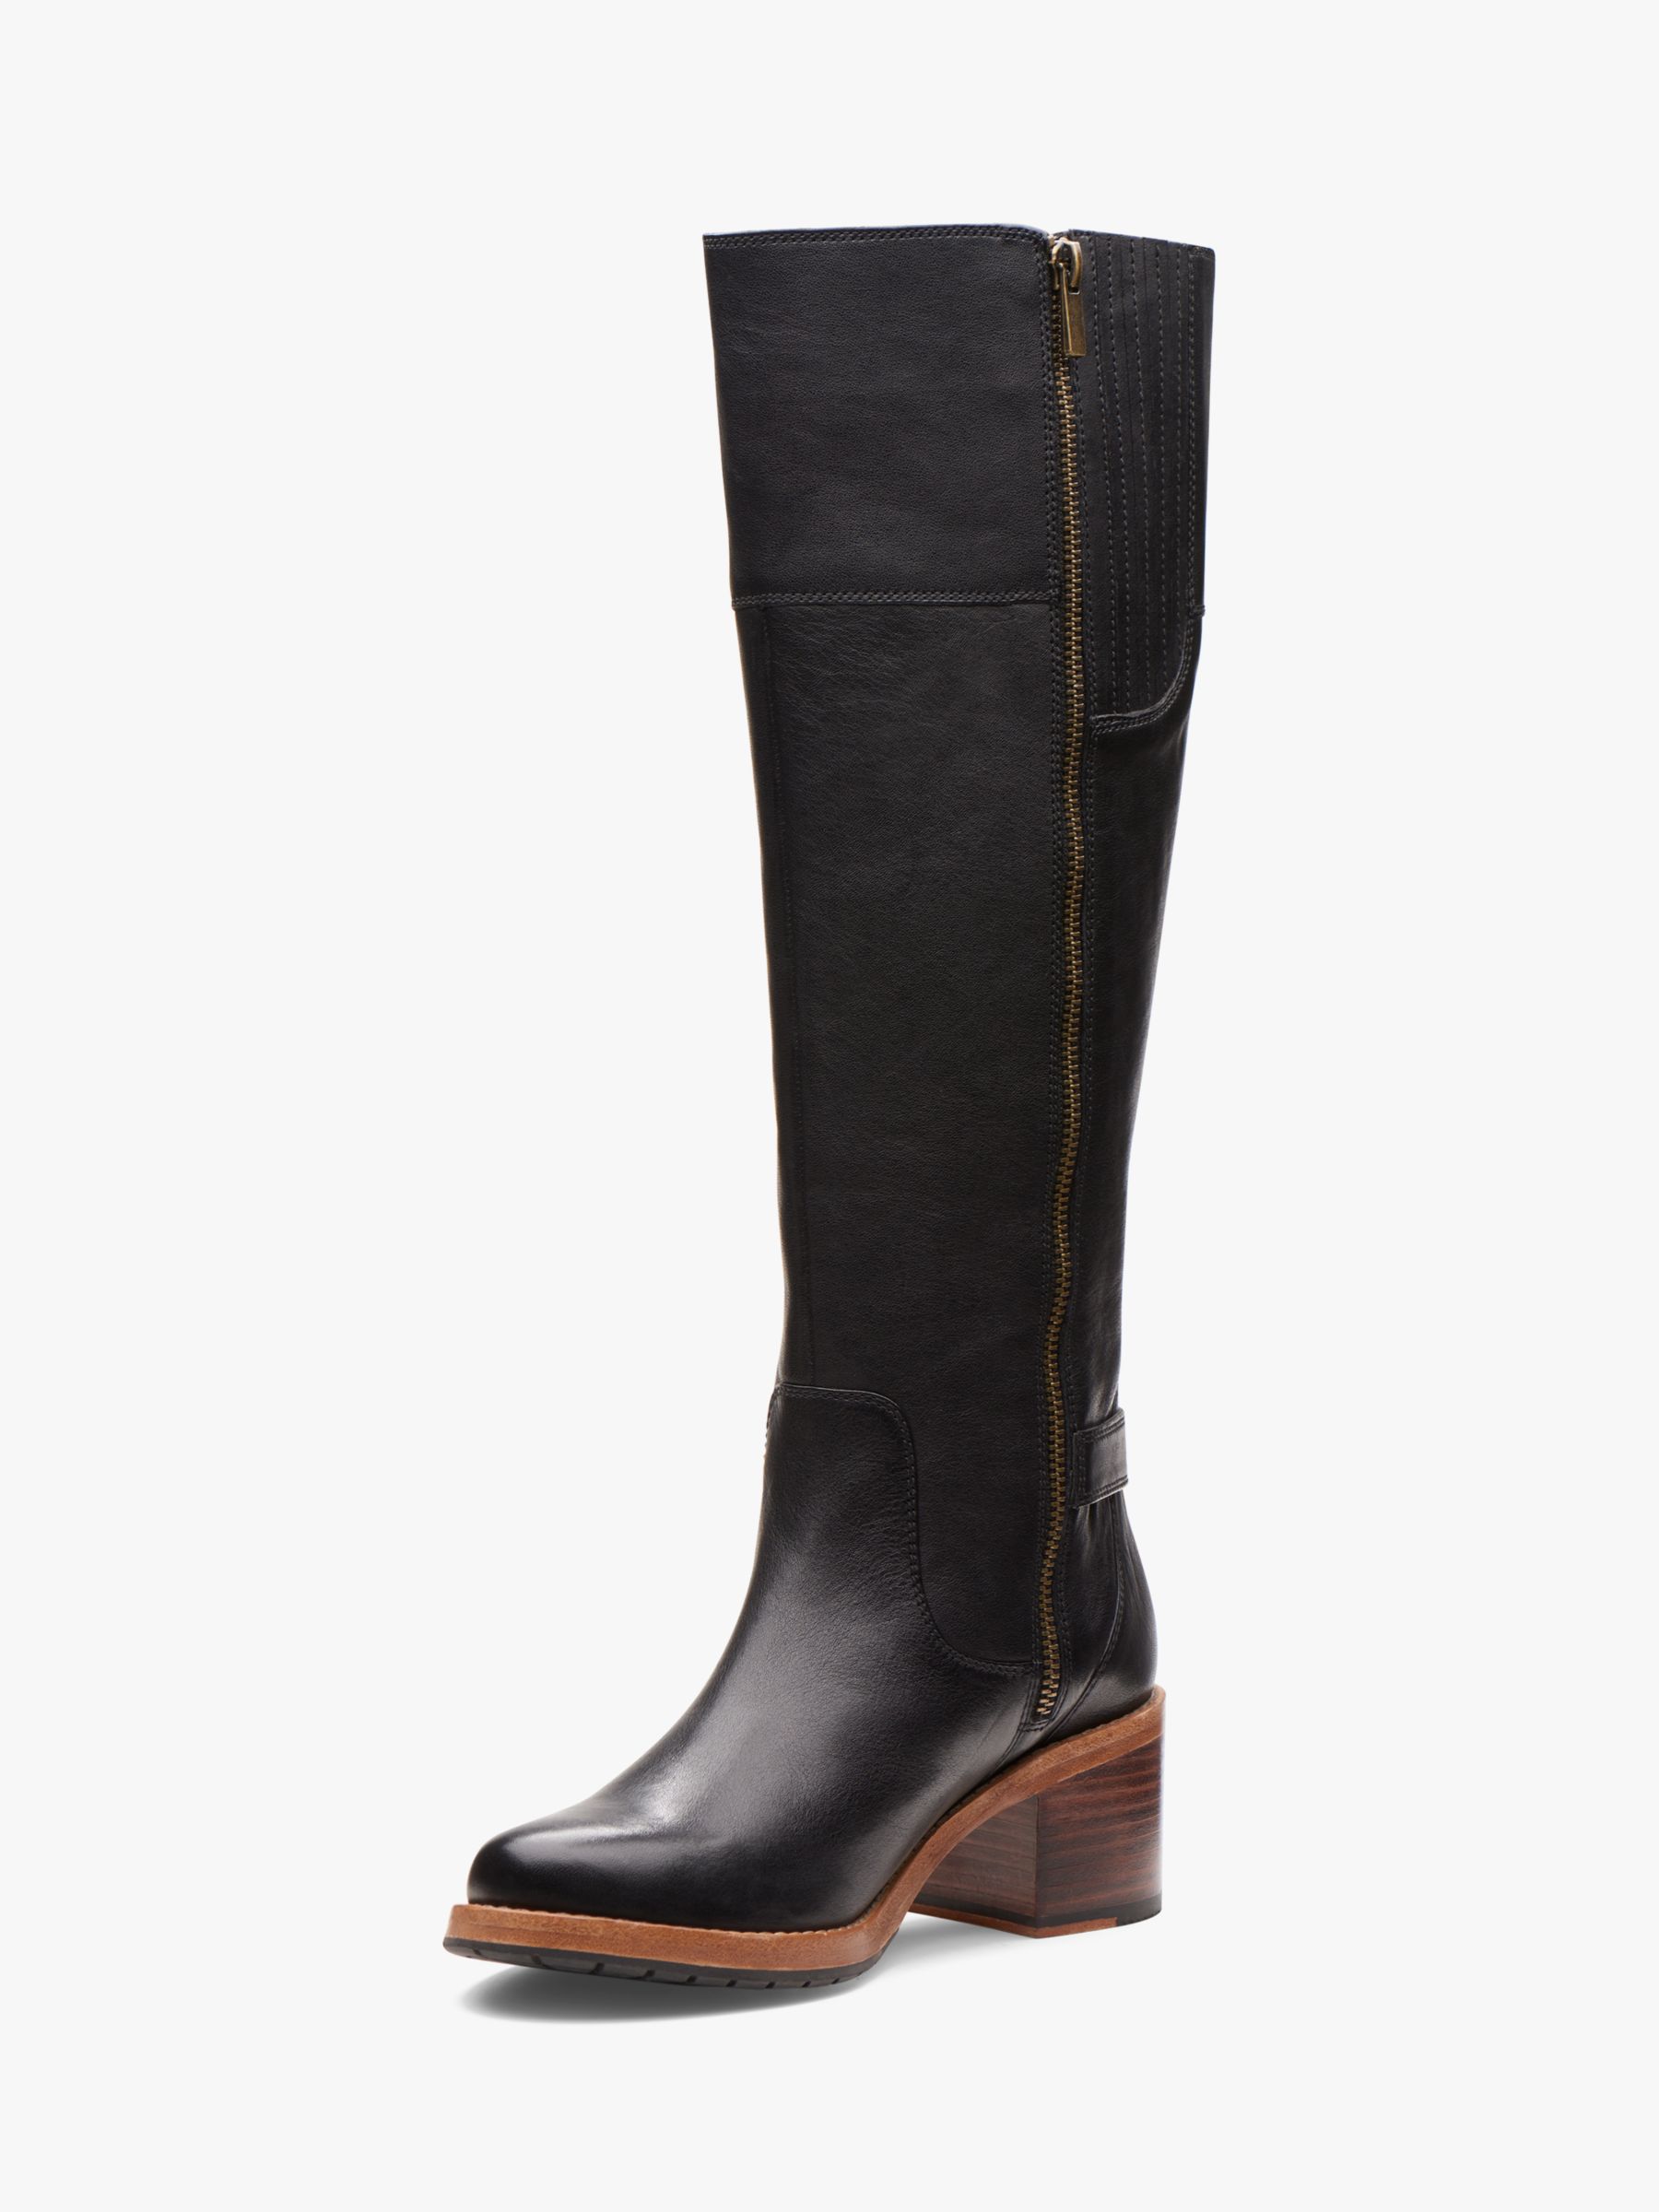 clarkdale sona boots